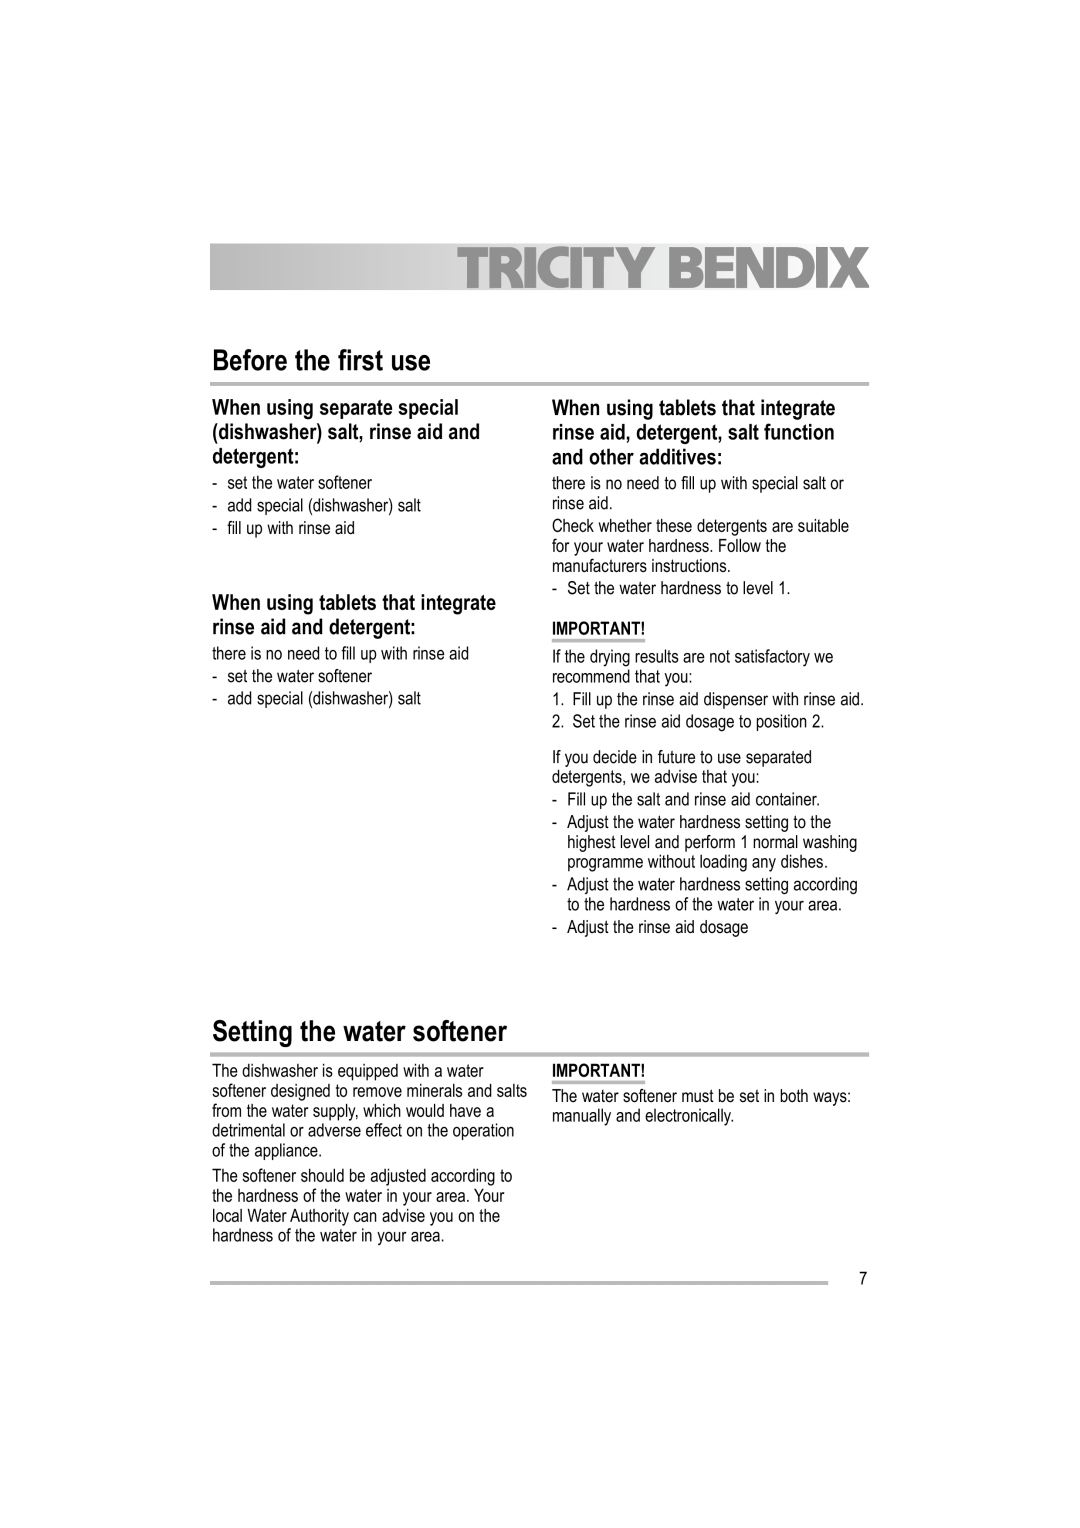 Tricity Bendix TDF 221 manual Before the first use, Setting the water softener 